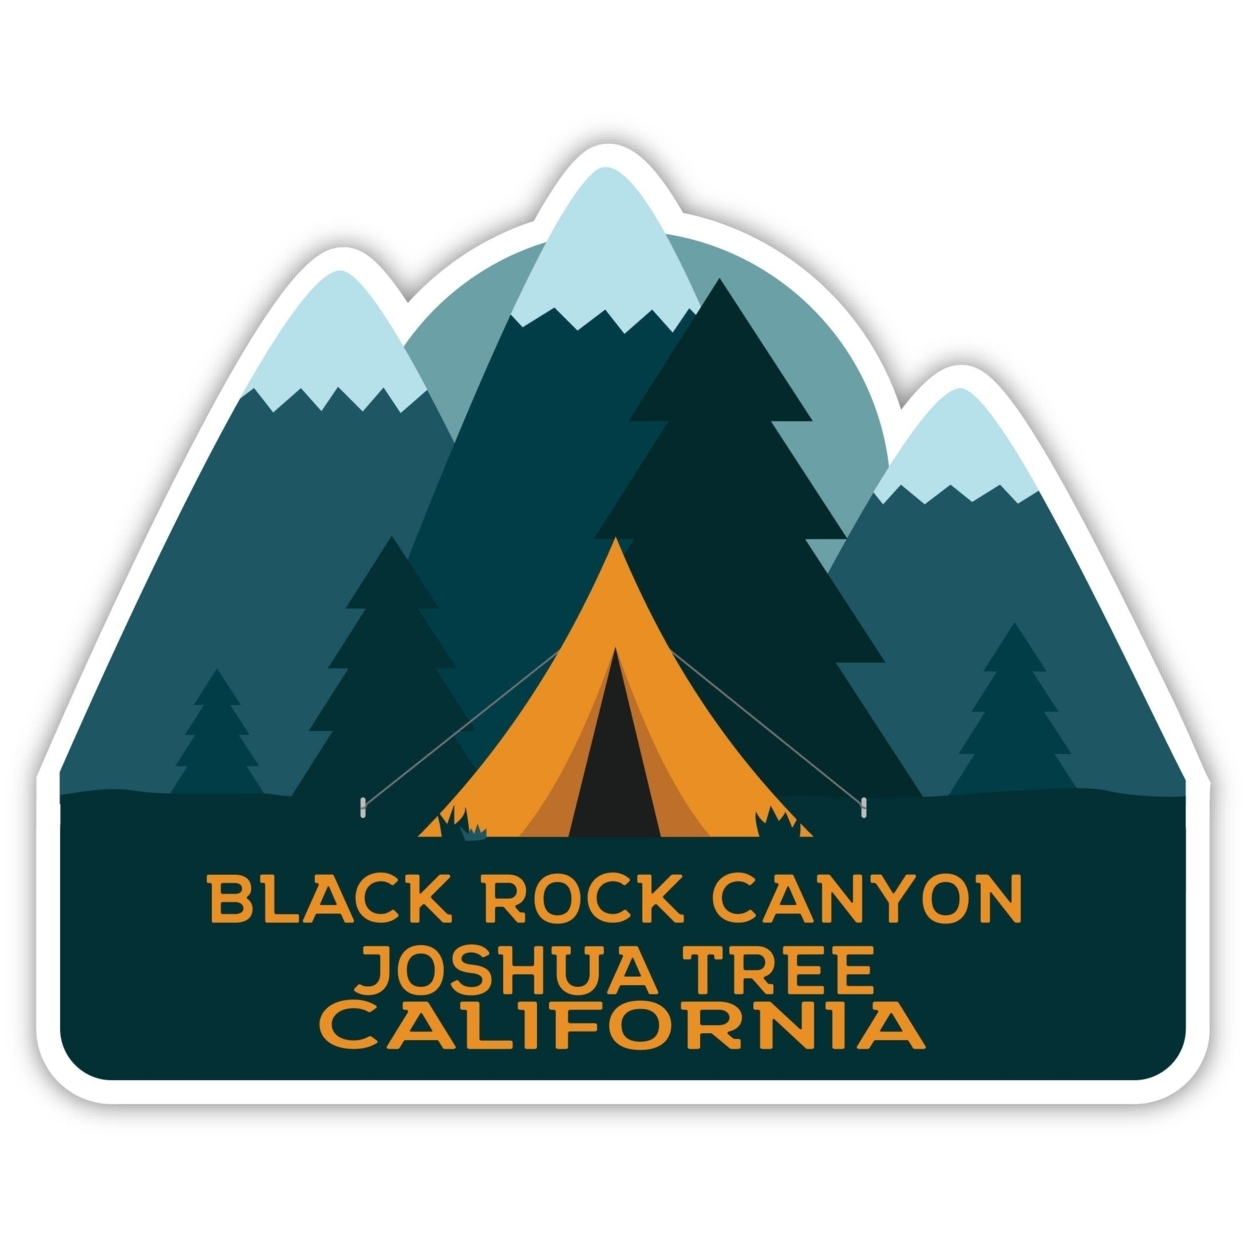 Black Rock Canyon Joshua Tree California Souvenir Decorative Stickers (Choose Theme And Size) - 4-Pack, 10-Inch, Tent